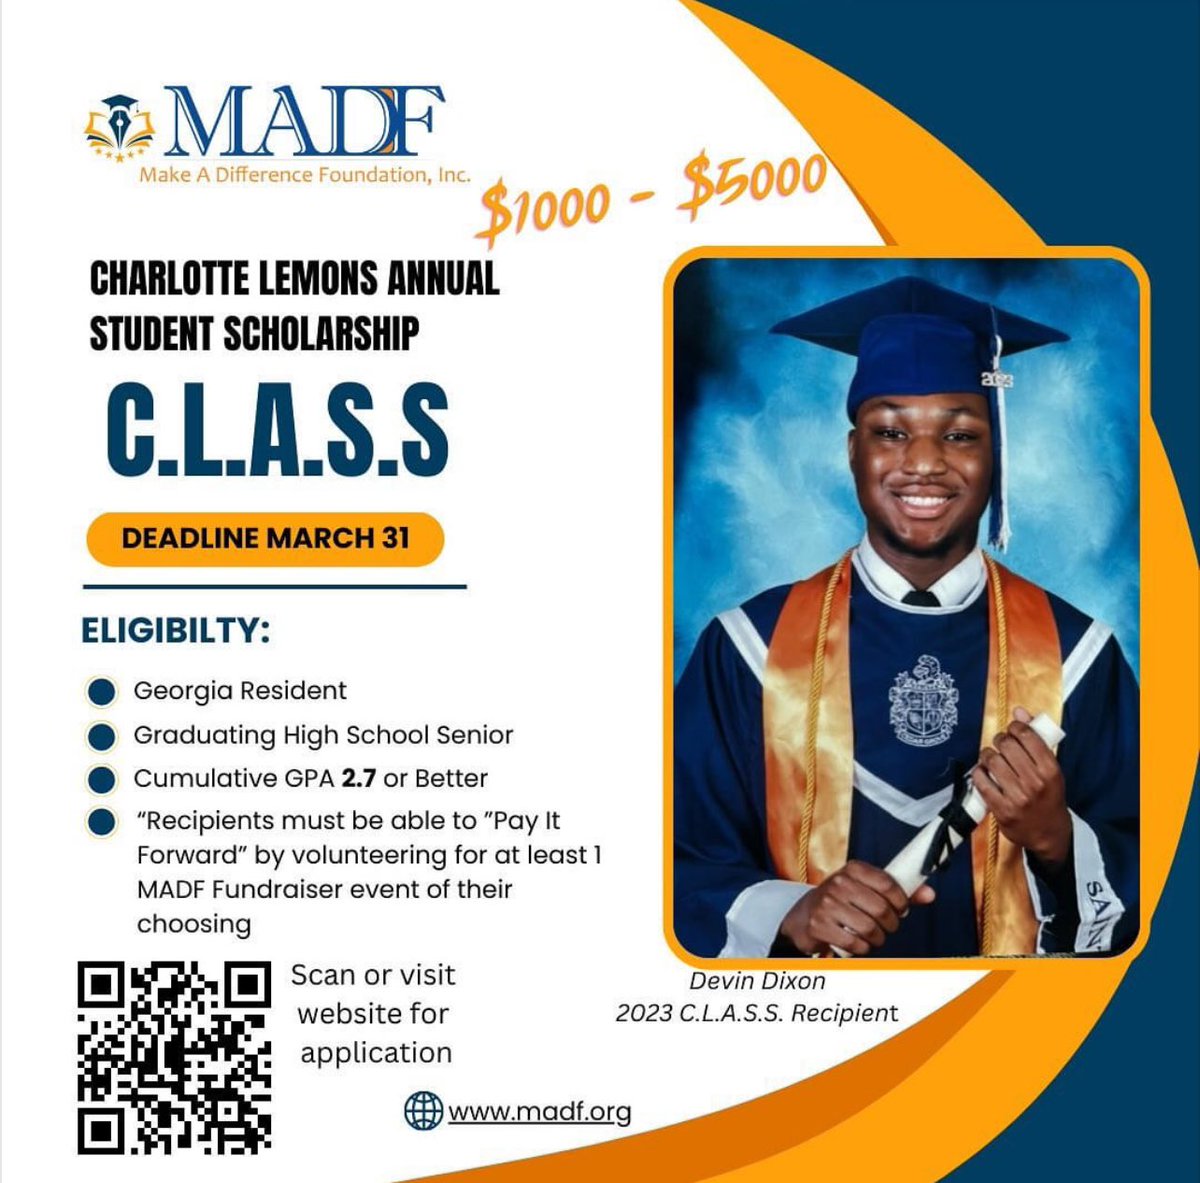 C.L.A.S.S. is now in session. Georgia High School Seniors, let us help you graduate college #debtfree. Deadline to apply is March 31, 2024. Don’t be late to C.L.A.S.S. #madf #classaward #schloarshipopportunities #debtfreedegree